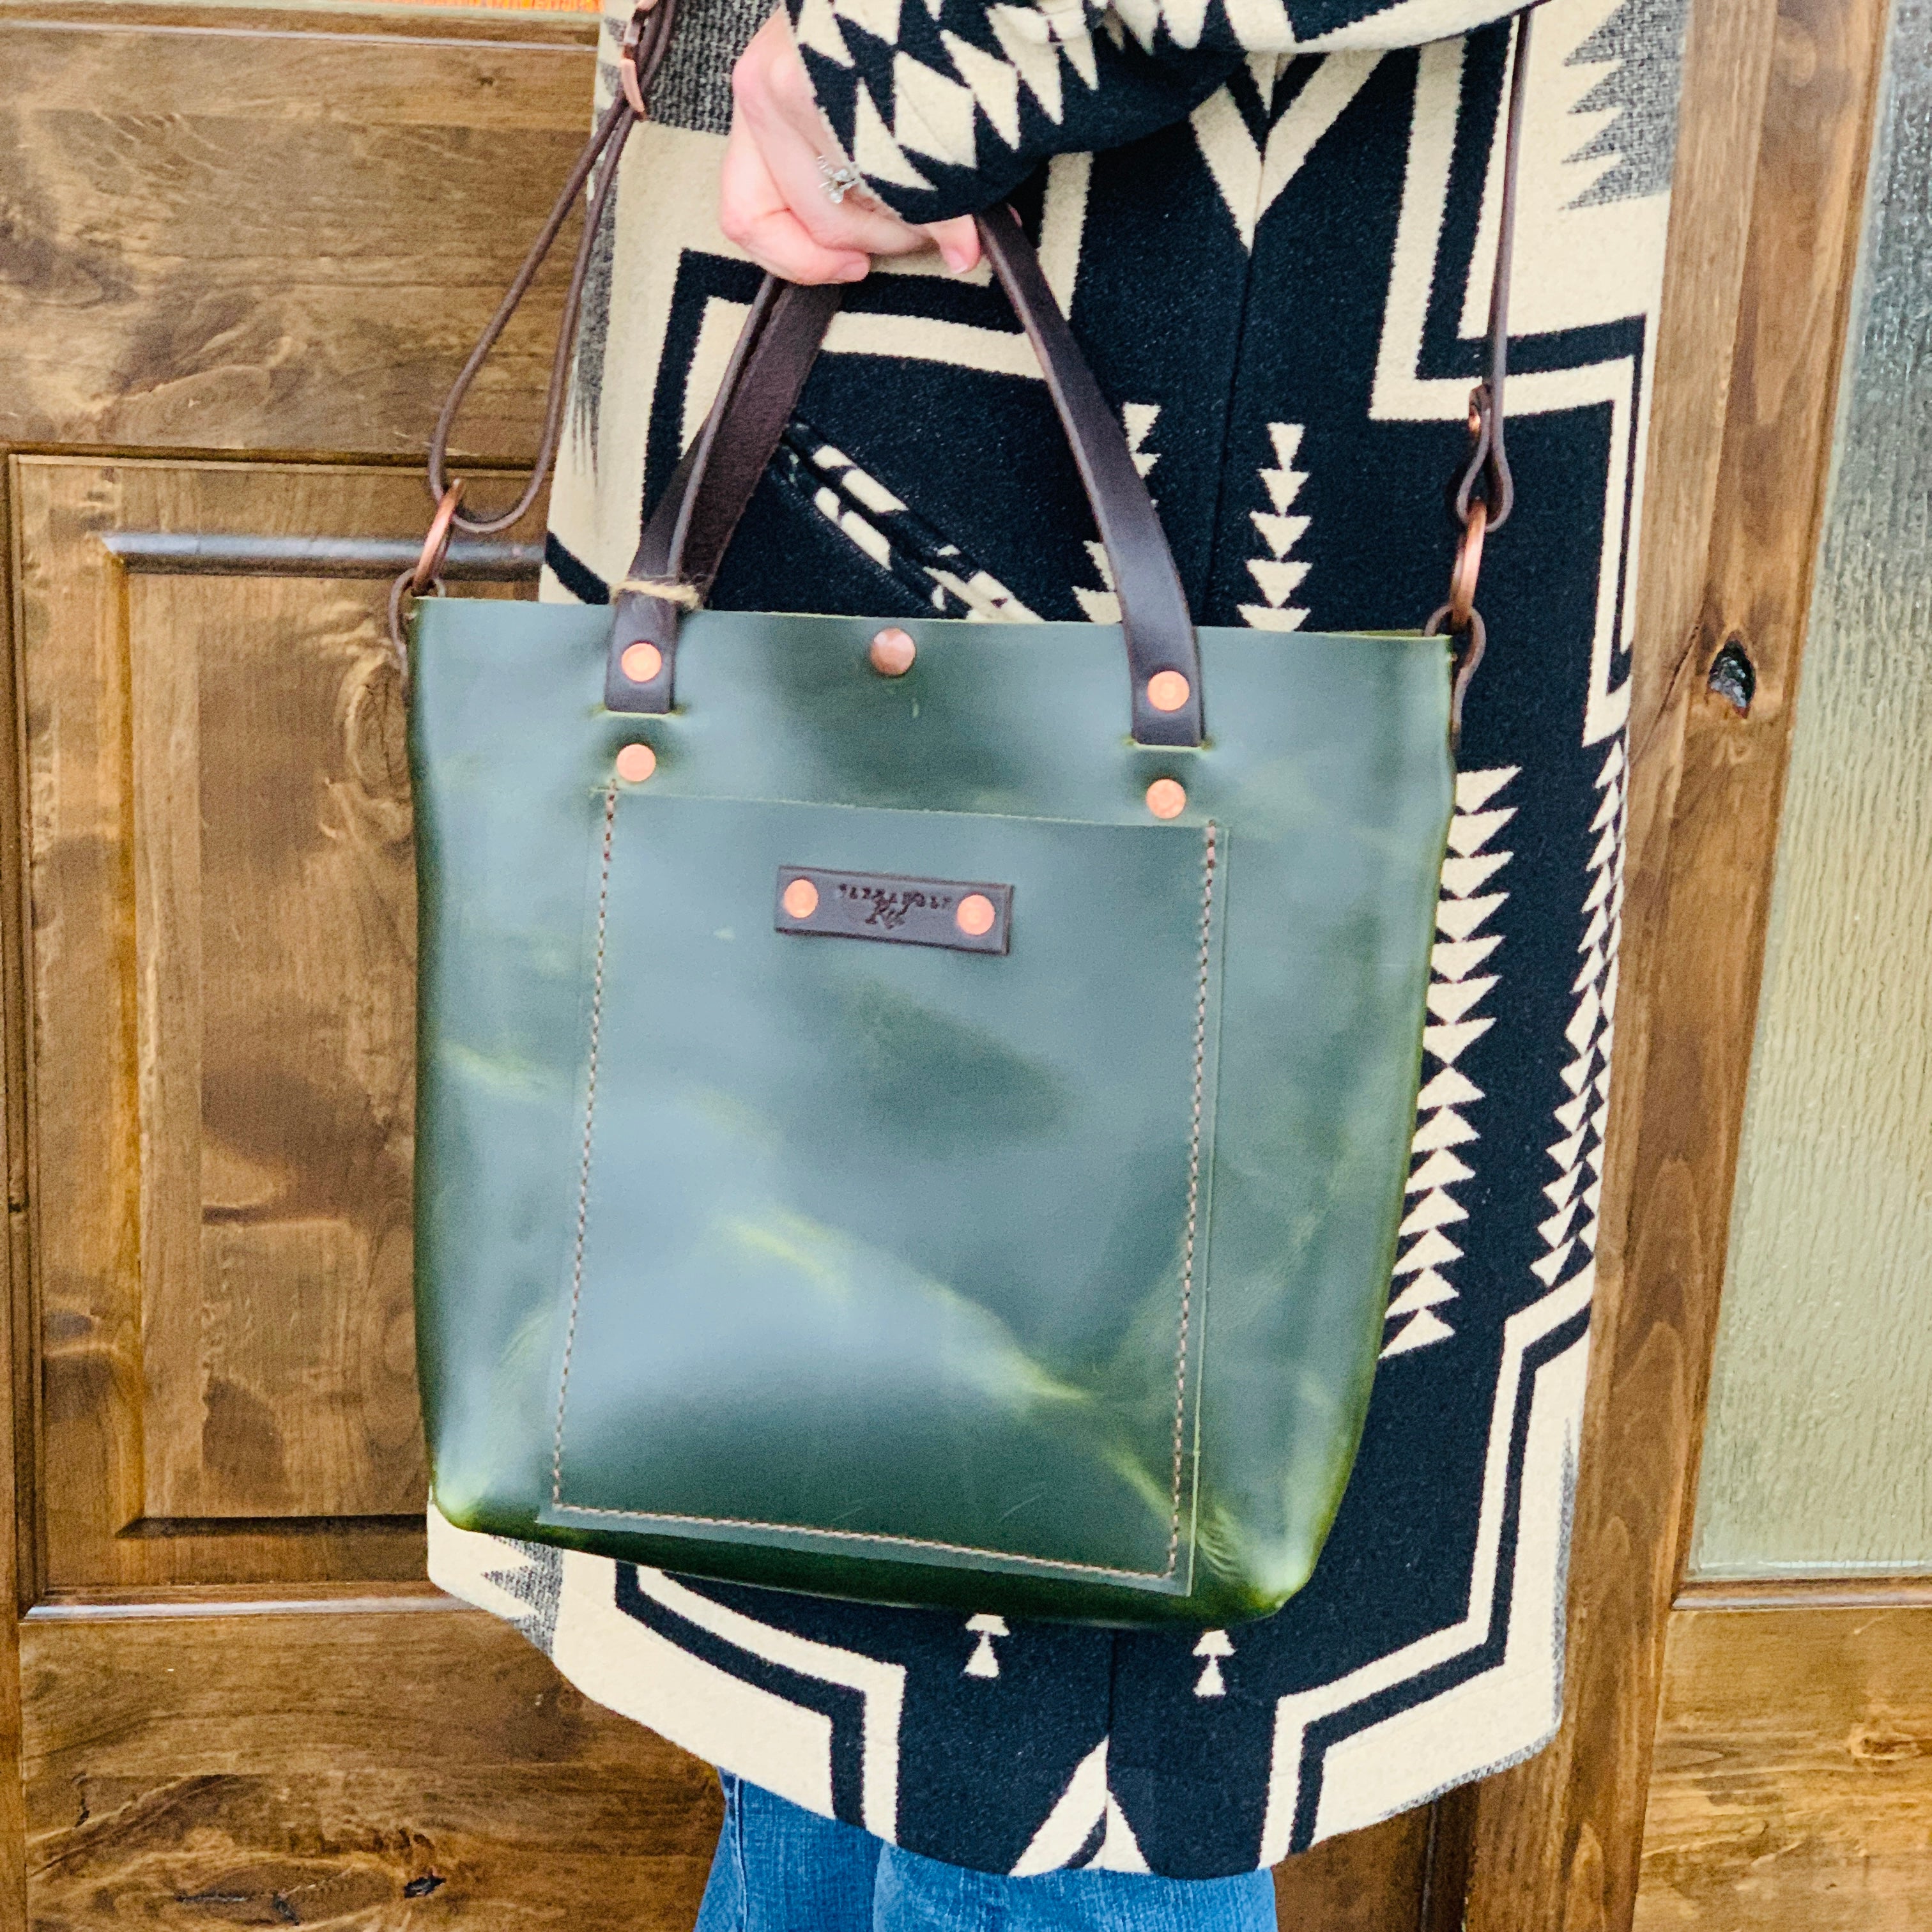 green purse handcrafted messenger bag handbag sale western store leather items gift shopping ideas event space silo store celebration